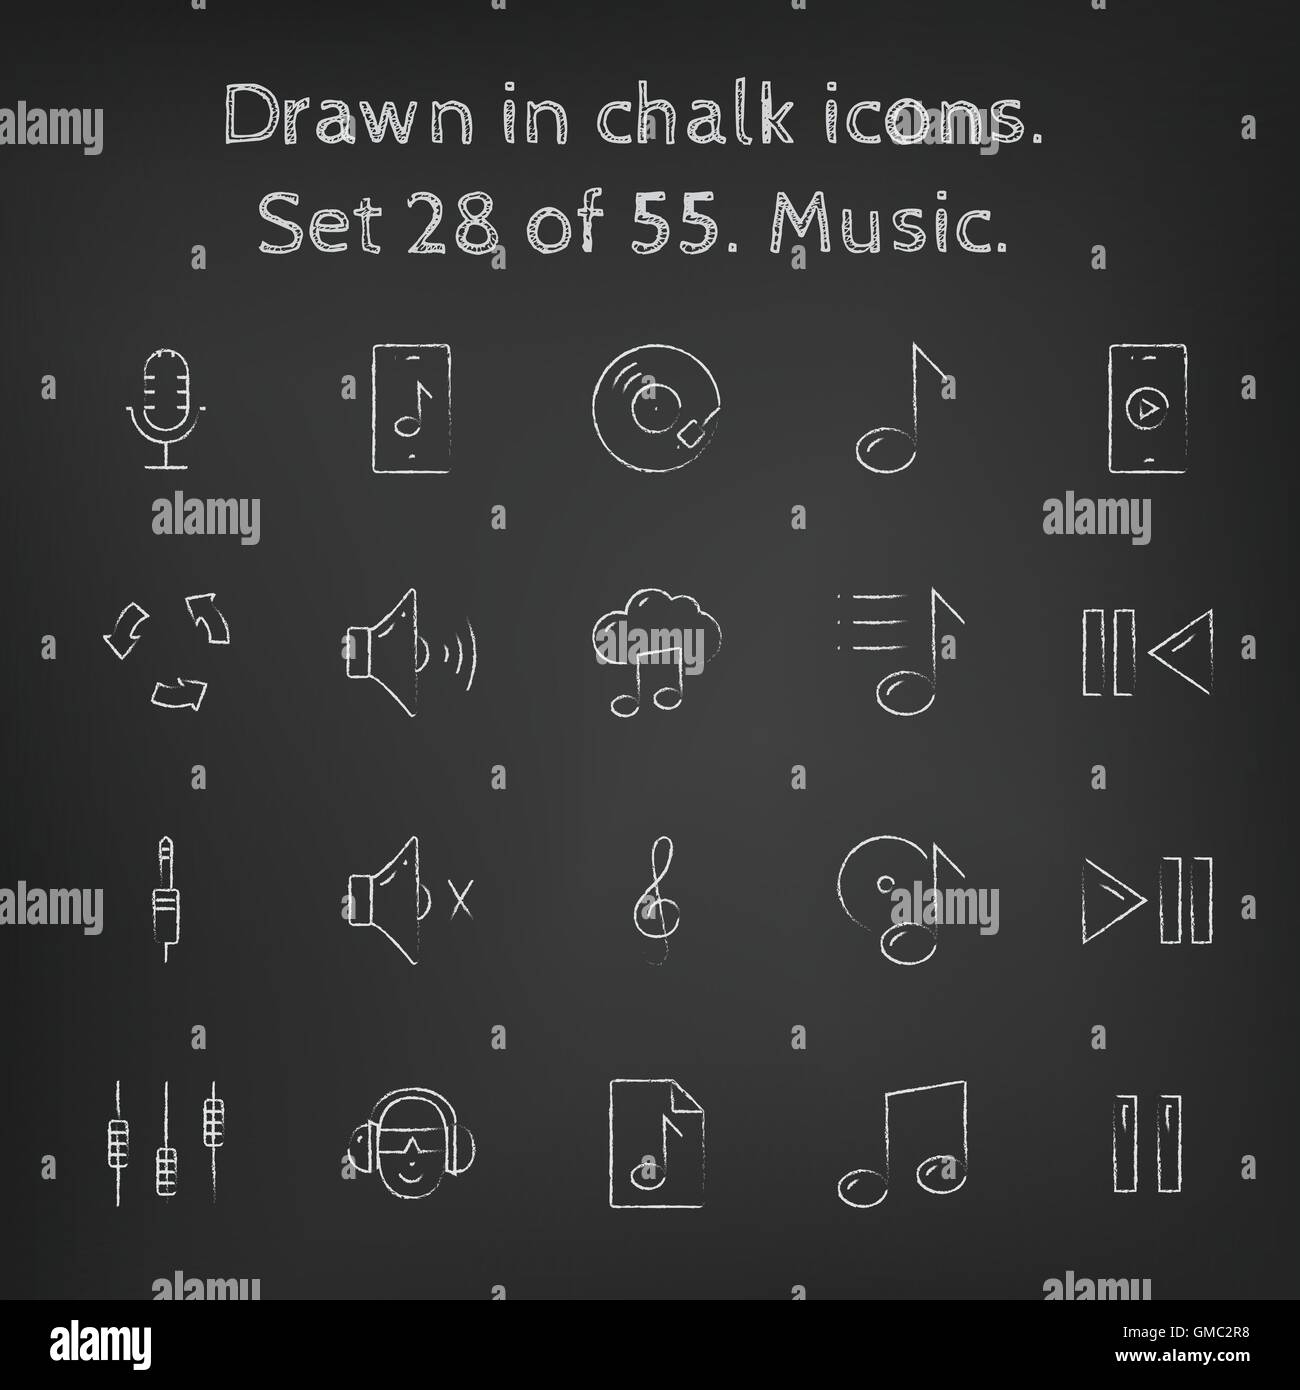 Music icon set drawn in chalk. Stock Vector